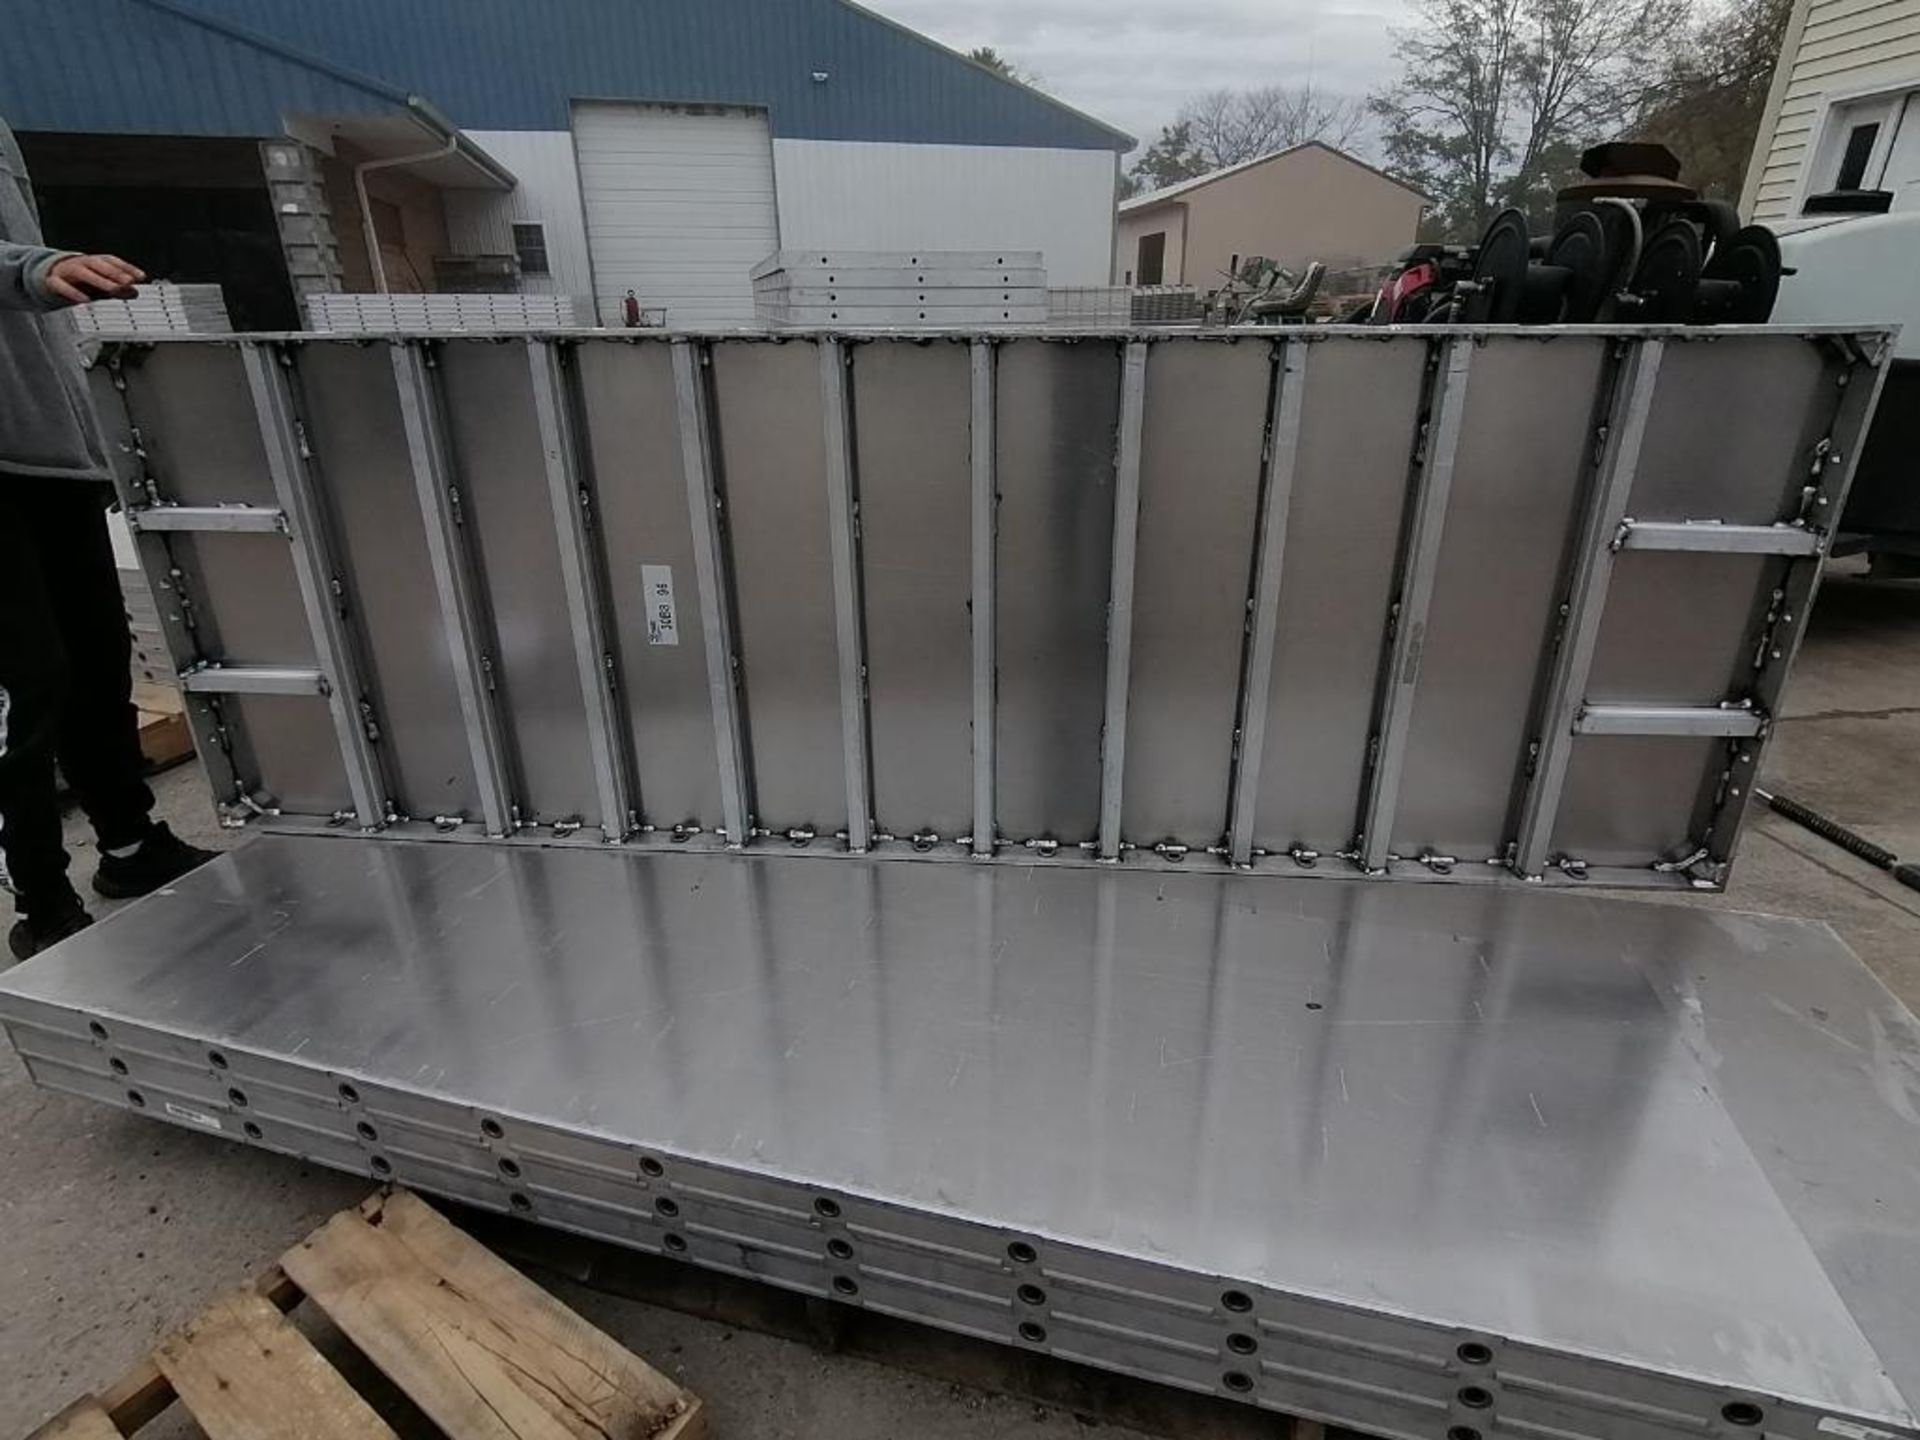 (4) 30" X 8' NEW Badger Smooth Aluminum Concrete Forms 8" Hole Pattern. Located in Mt. Pleasant, - Image 6 of 7